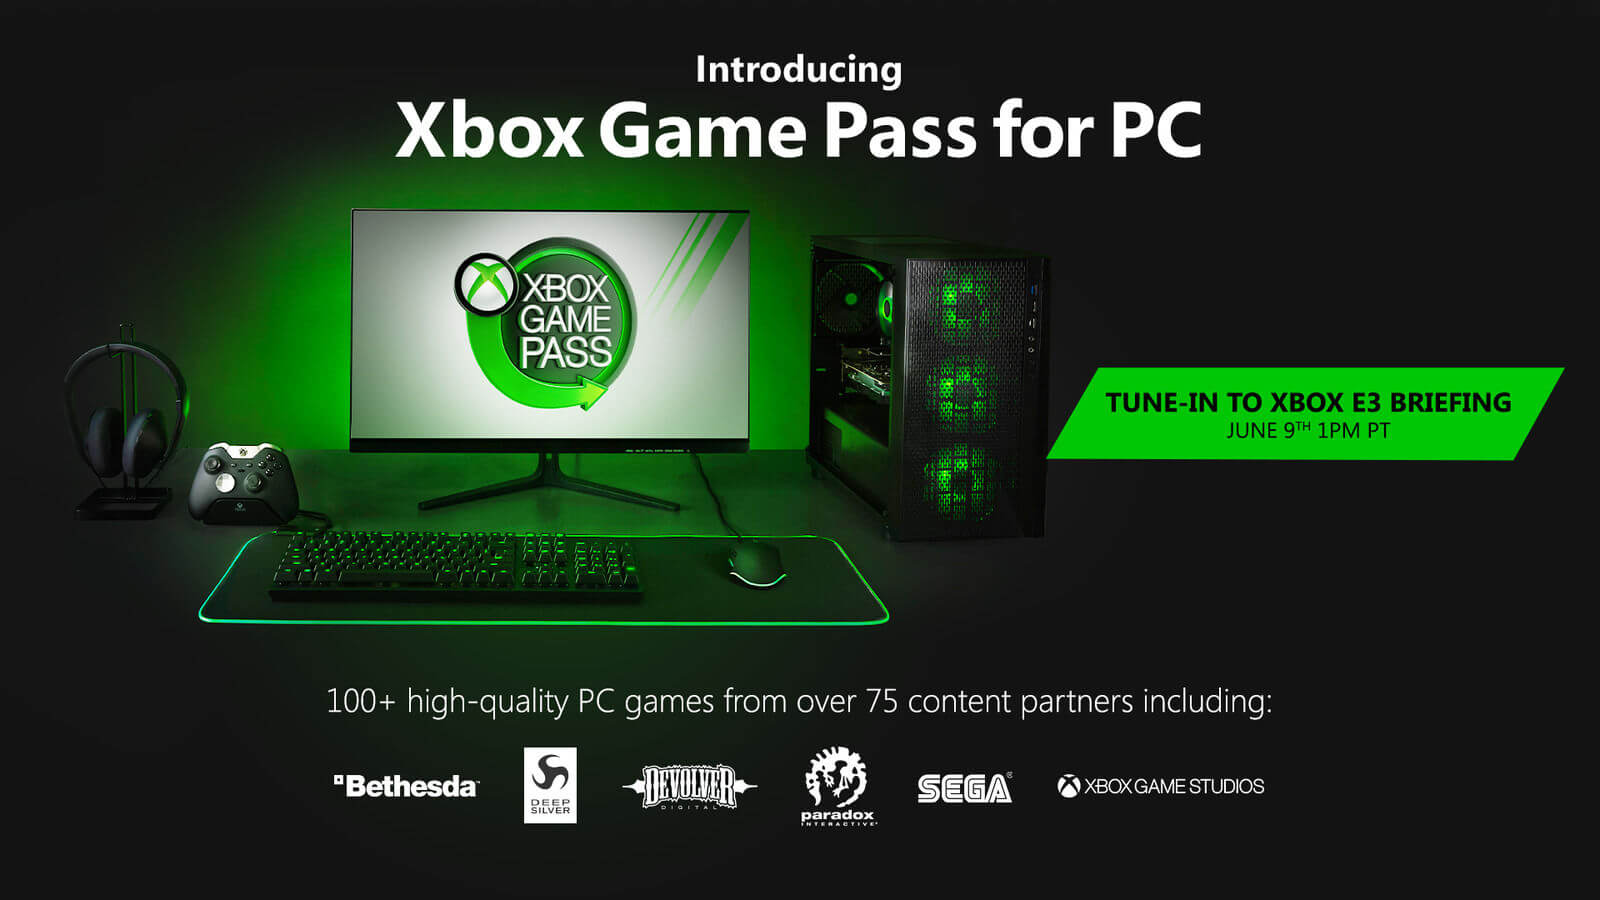 Microsoft's Xbox Game Pass is heading to the PC